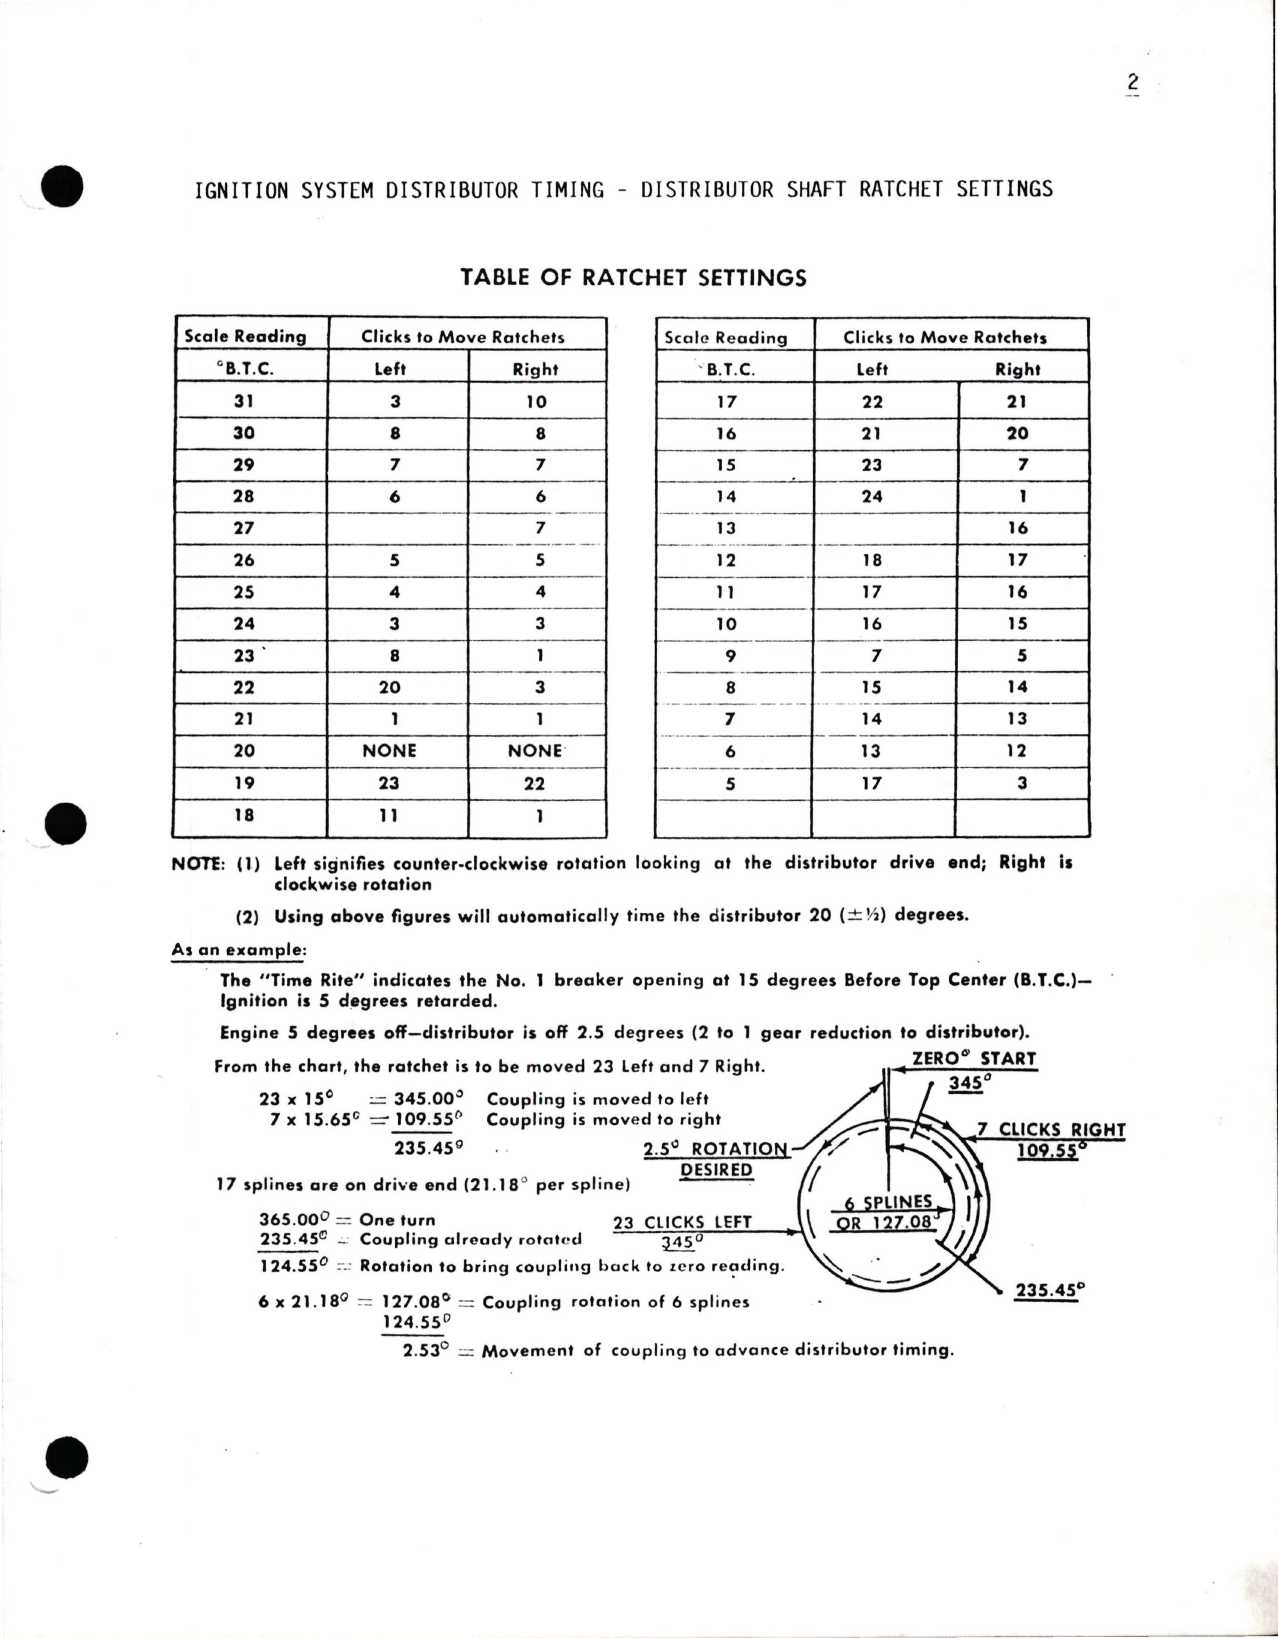 Sample page 8 from AirCorps Library document: Trouble Shooting for D-6